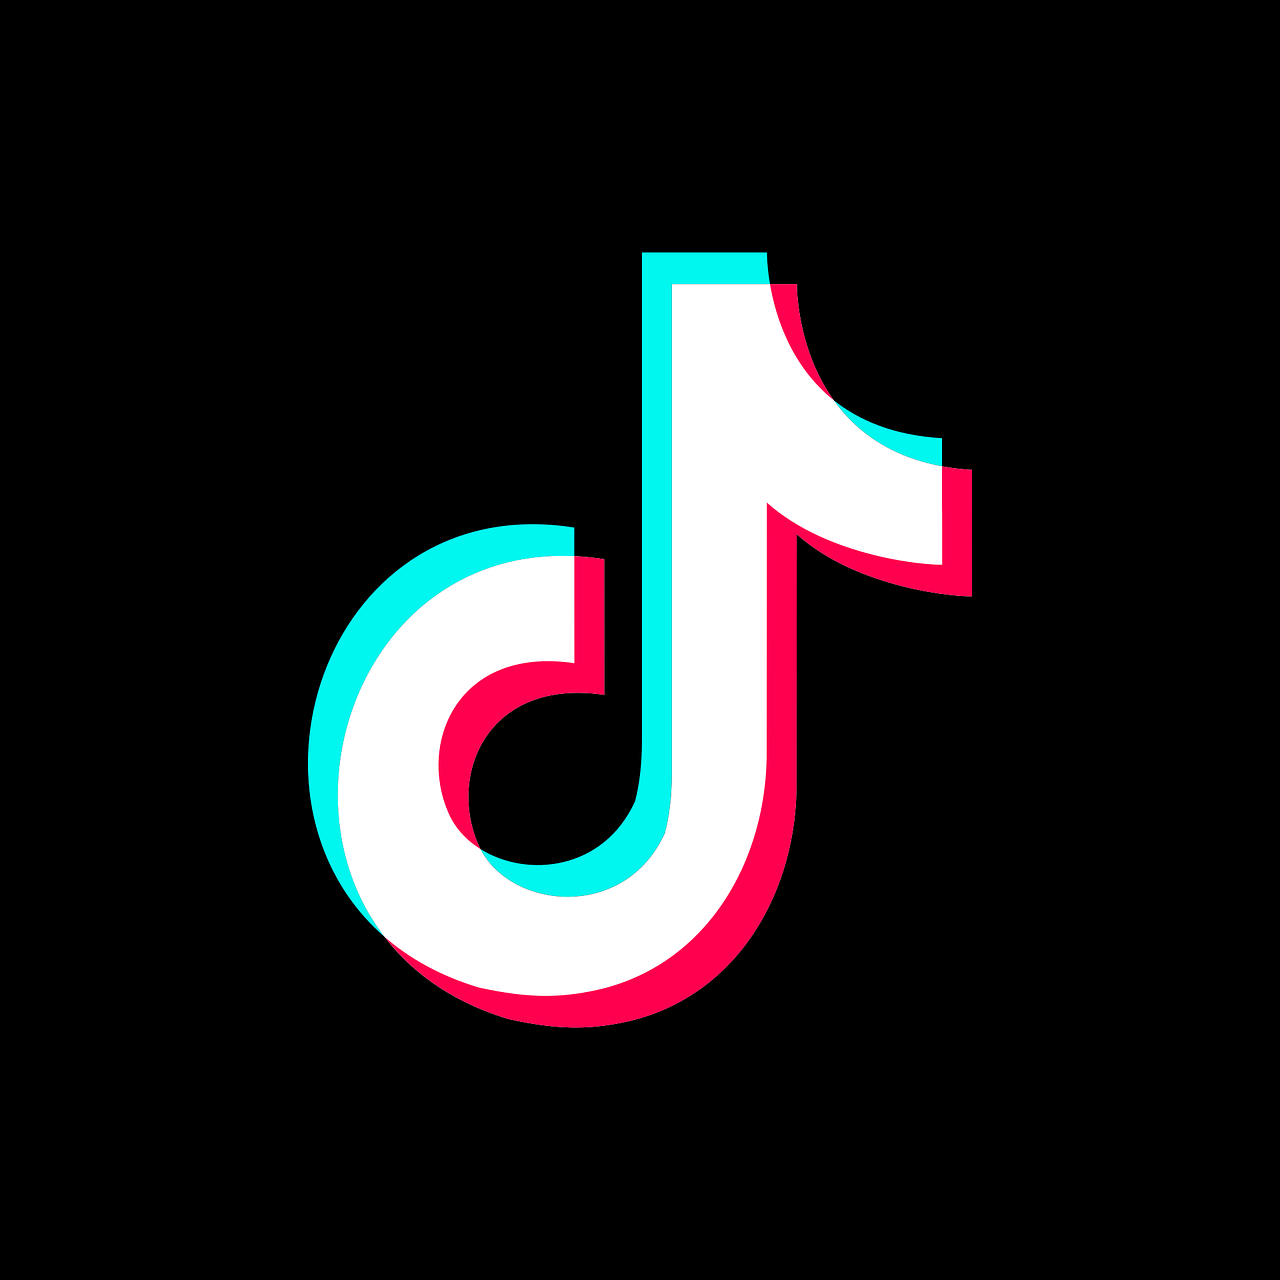 TikTok creators warn of economic impact if app sees ban, call it a vital space for the marginalized